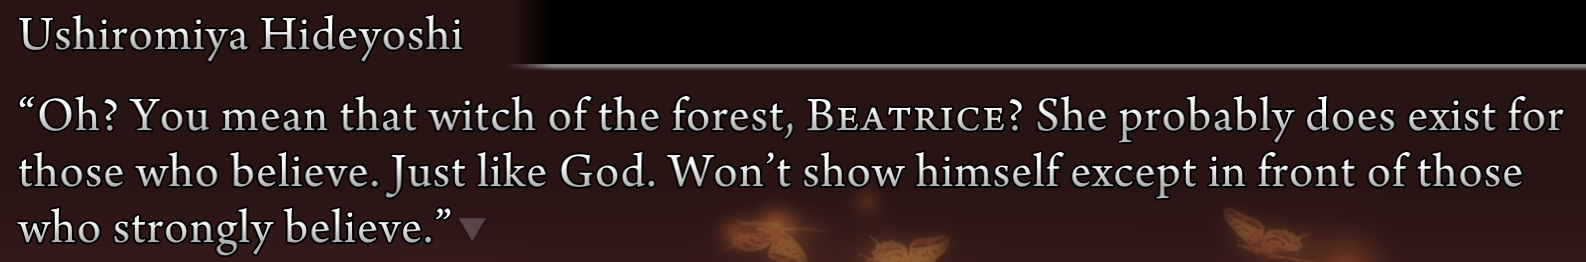 Hideyoshi: Oh? You mean that witch of the forest, Beatrice? She probably does exist for those who believe. Just like God. Won't show himself except in front of those who strongly believe.